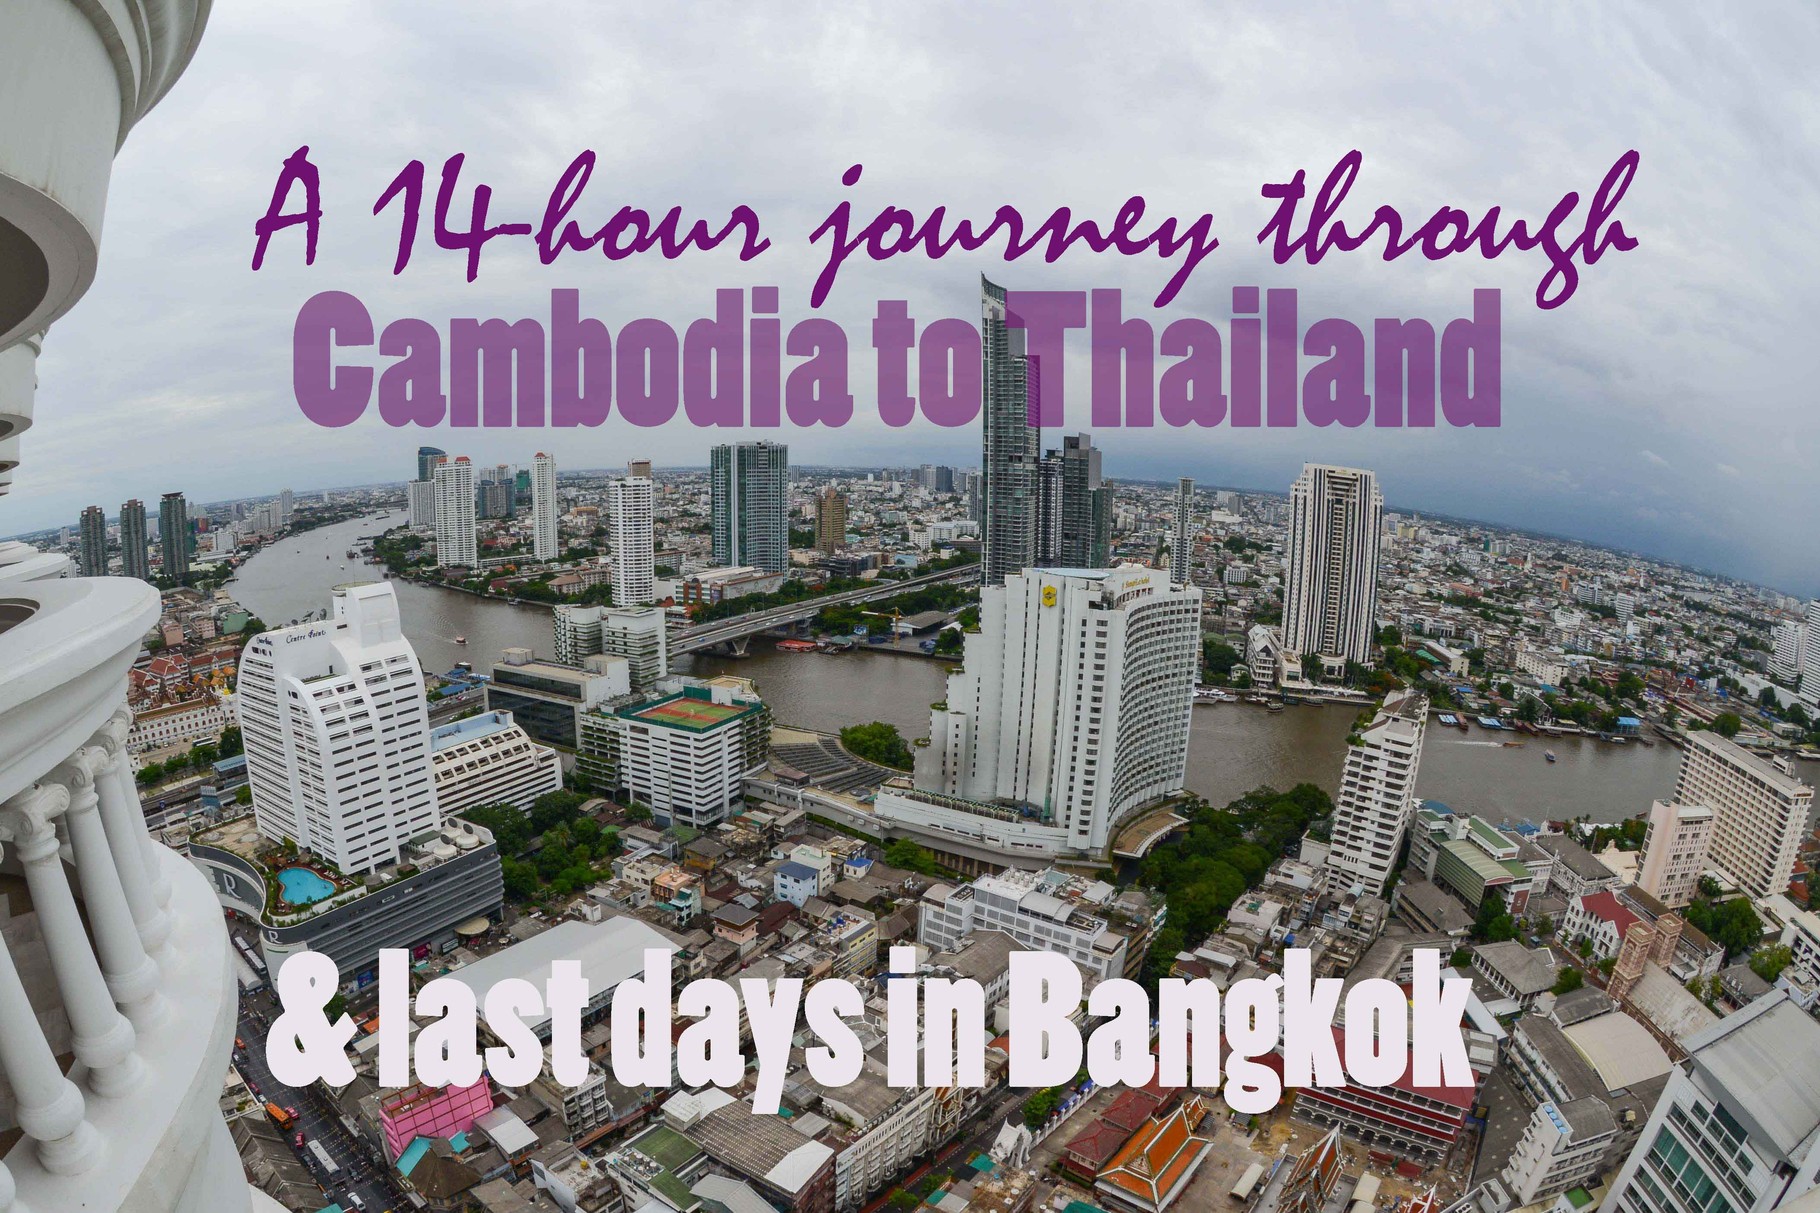 travelling to cambodia from thailand